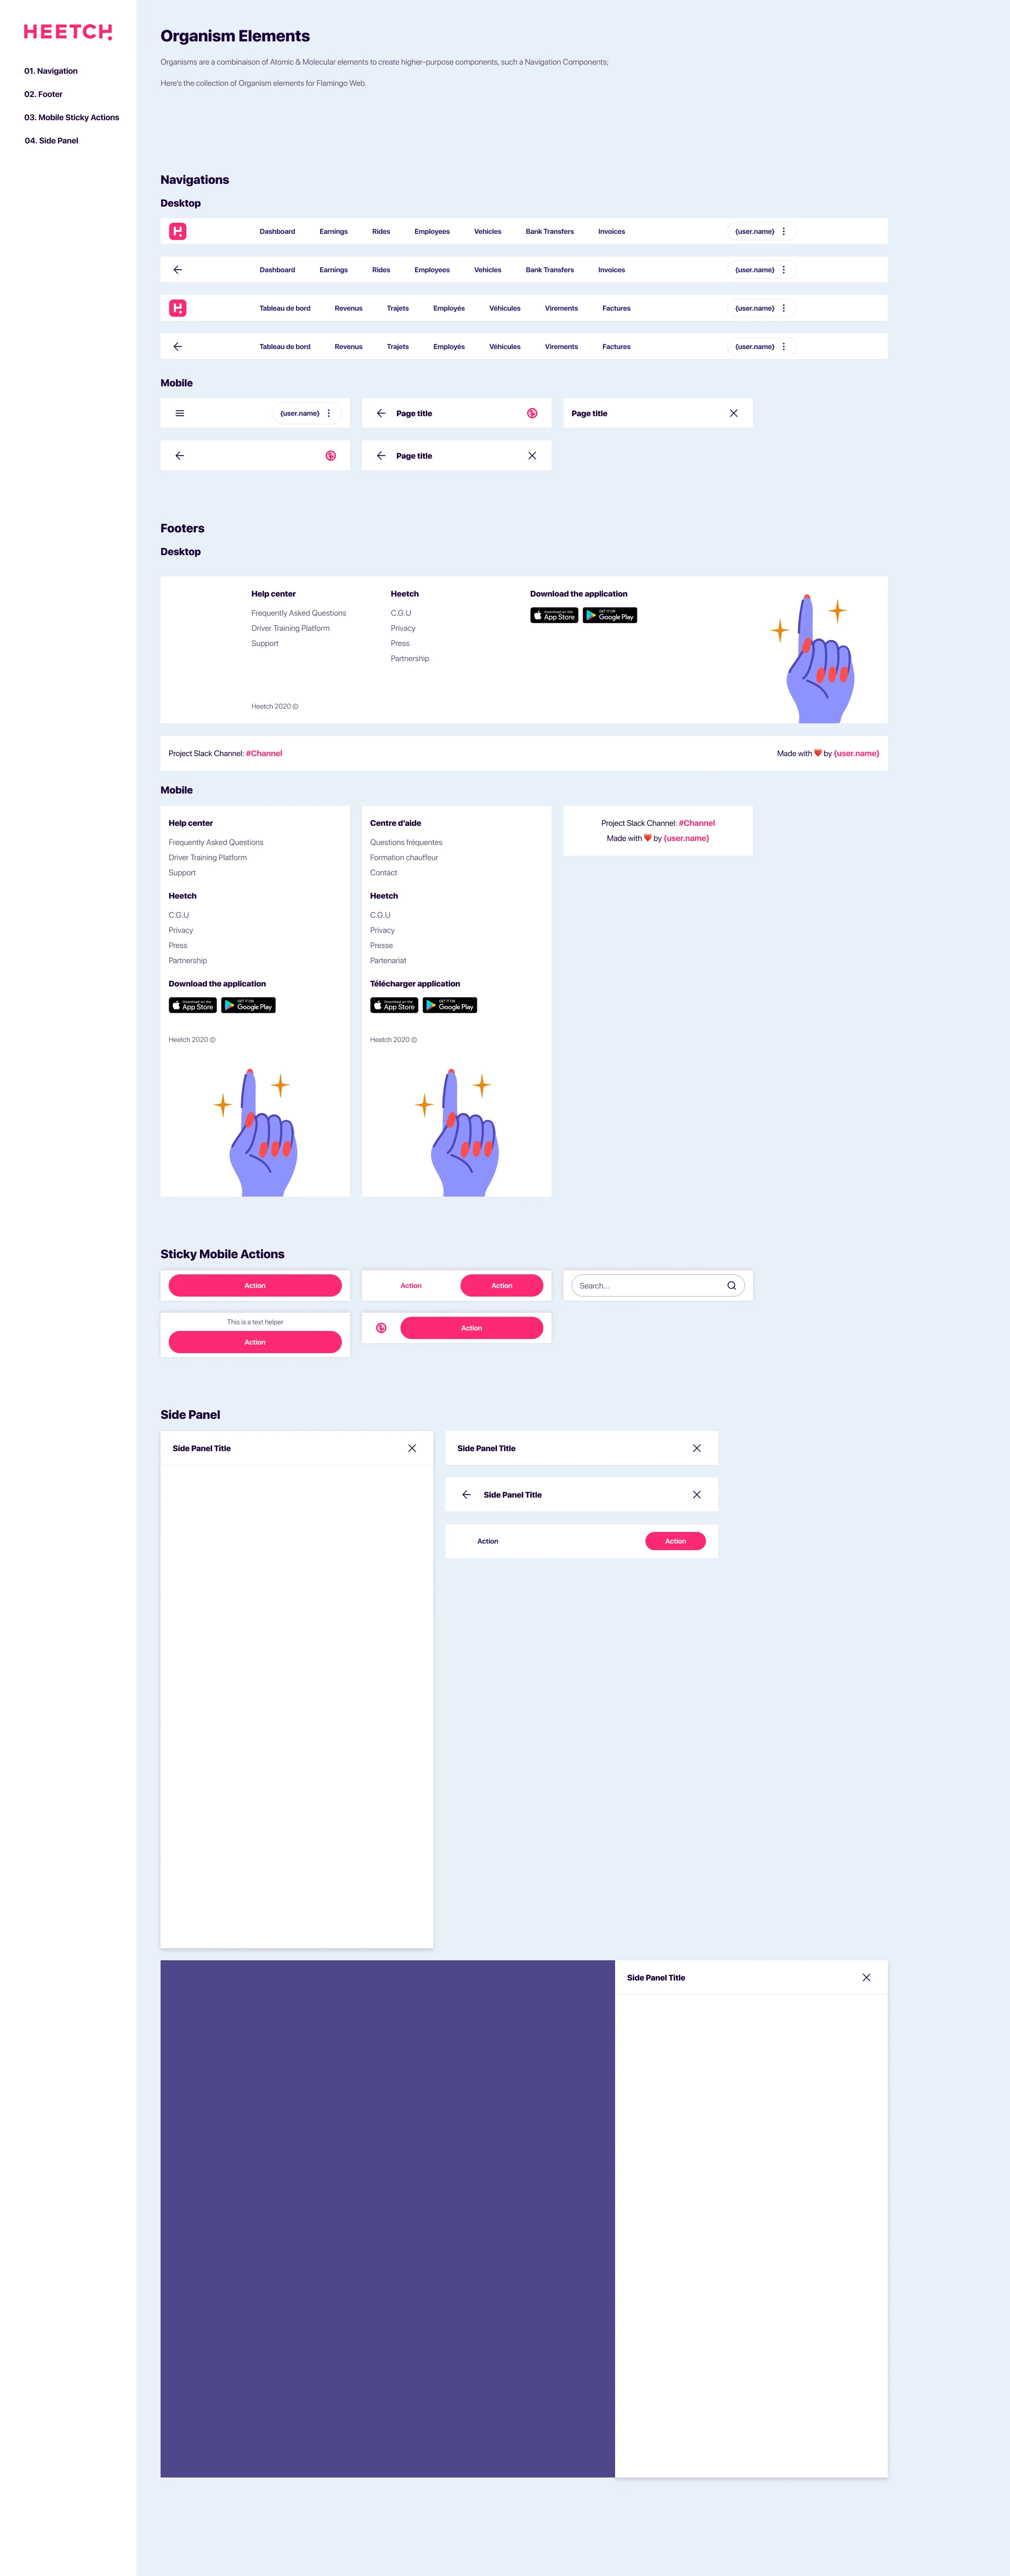 Flamingo Design System for Figma - Flamingo is a small design system that can help aspiring designers. It's based on atomic design principles.